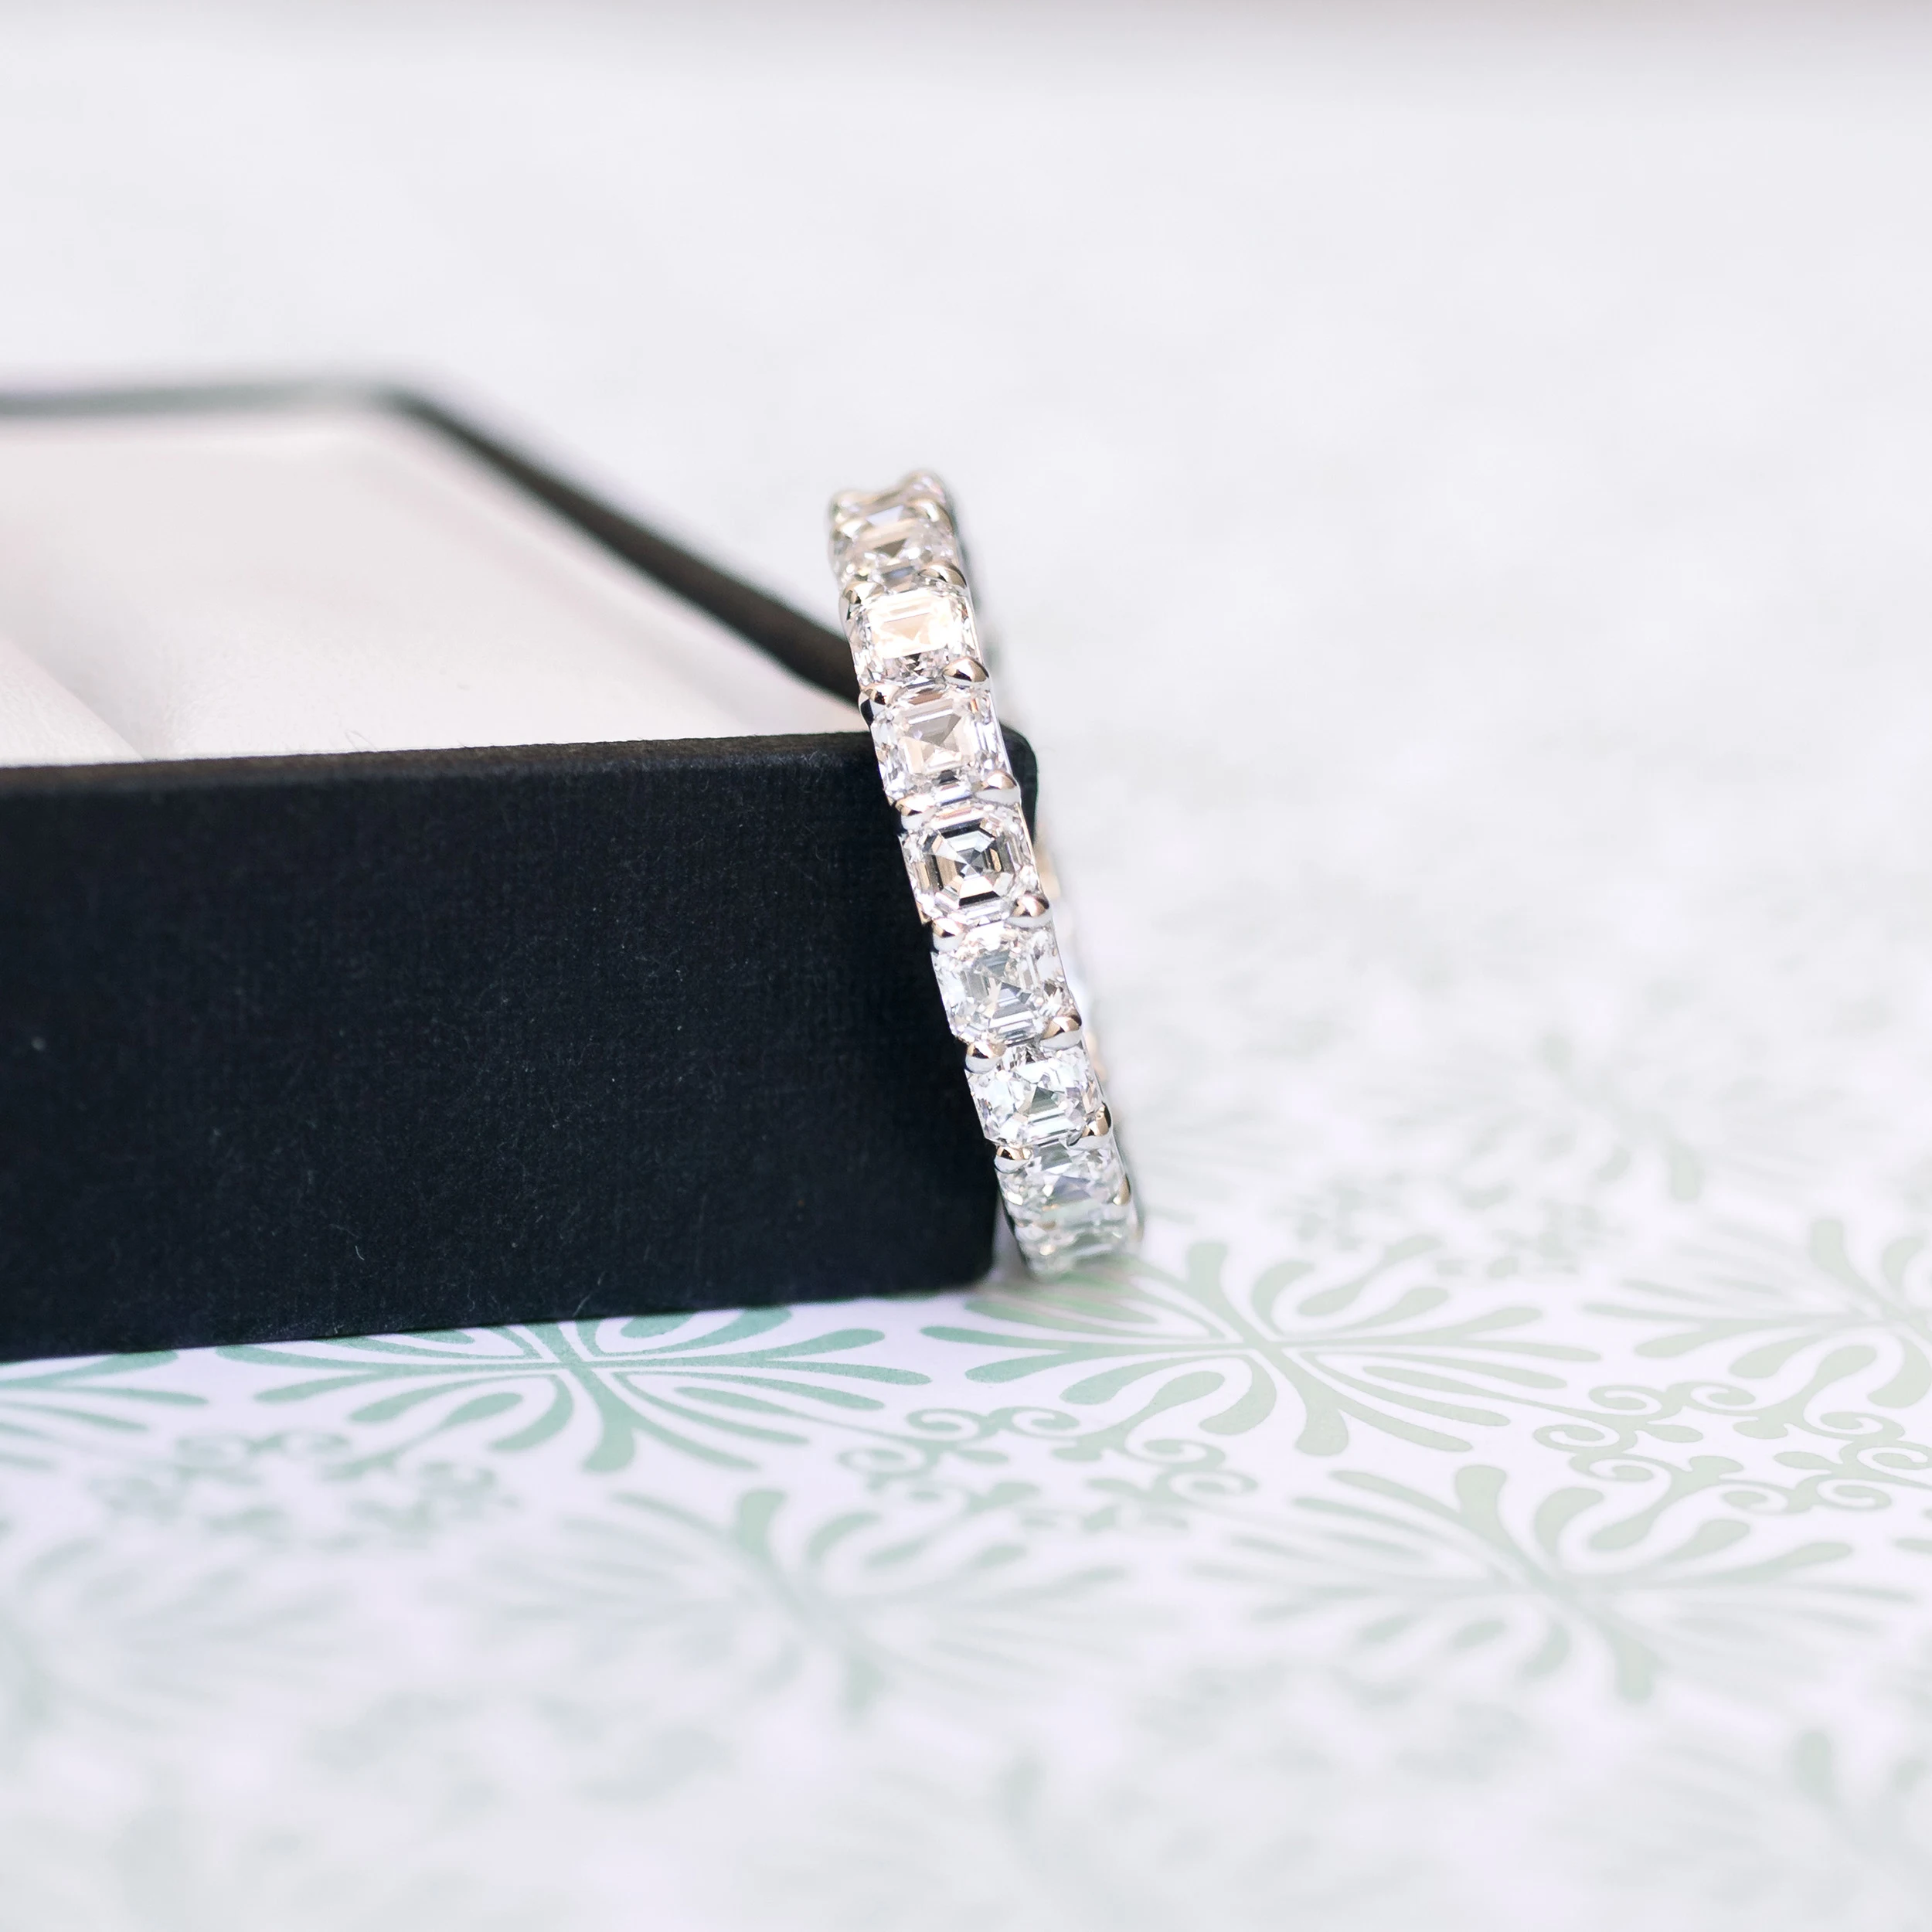 High Quality 4.0 ct Diamonds set in Platinum Asscher Eternity Band (Side View)